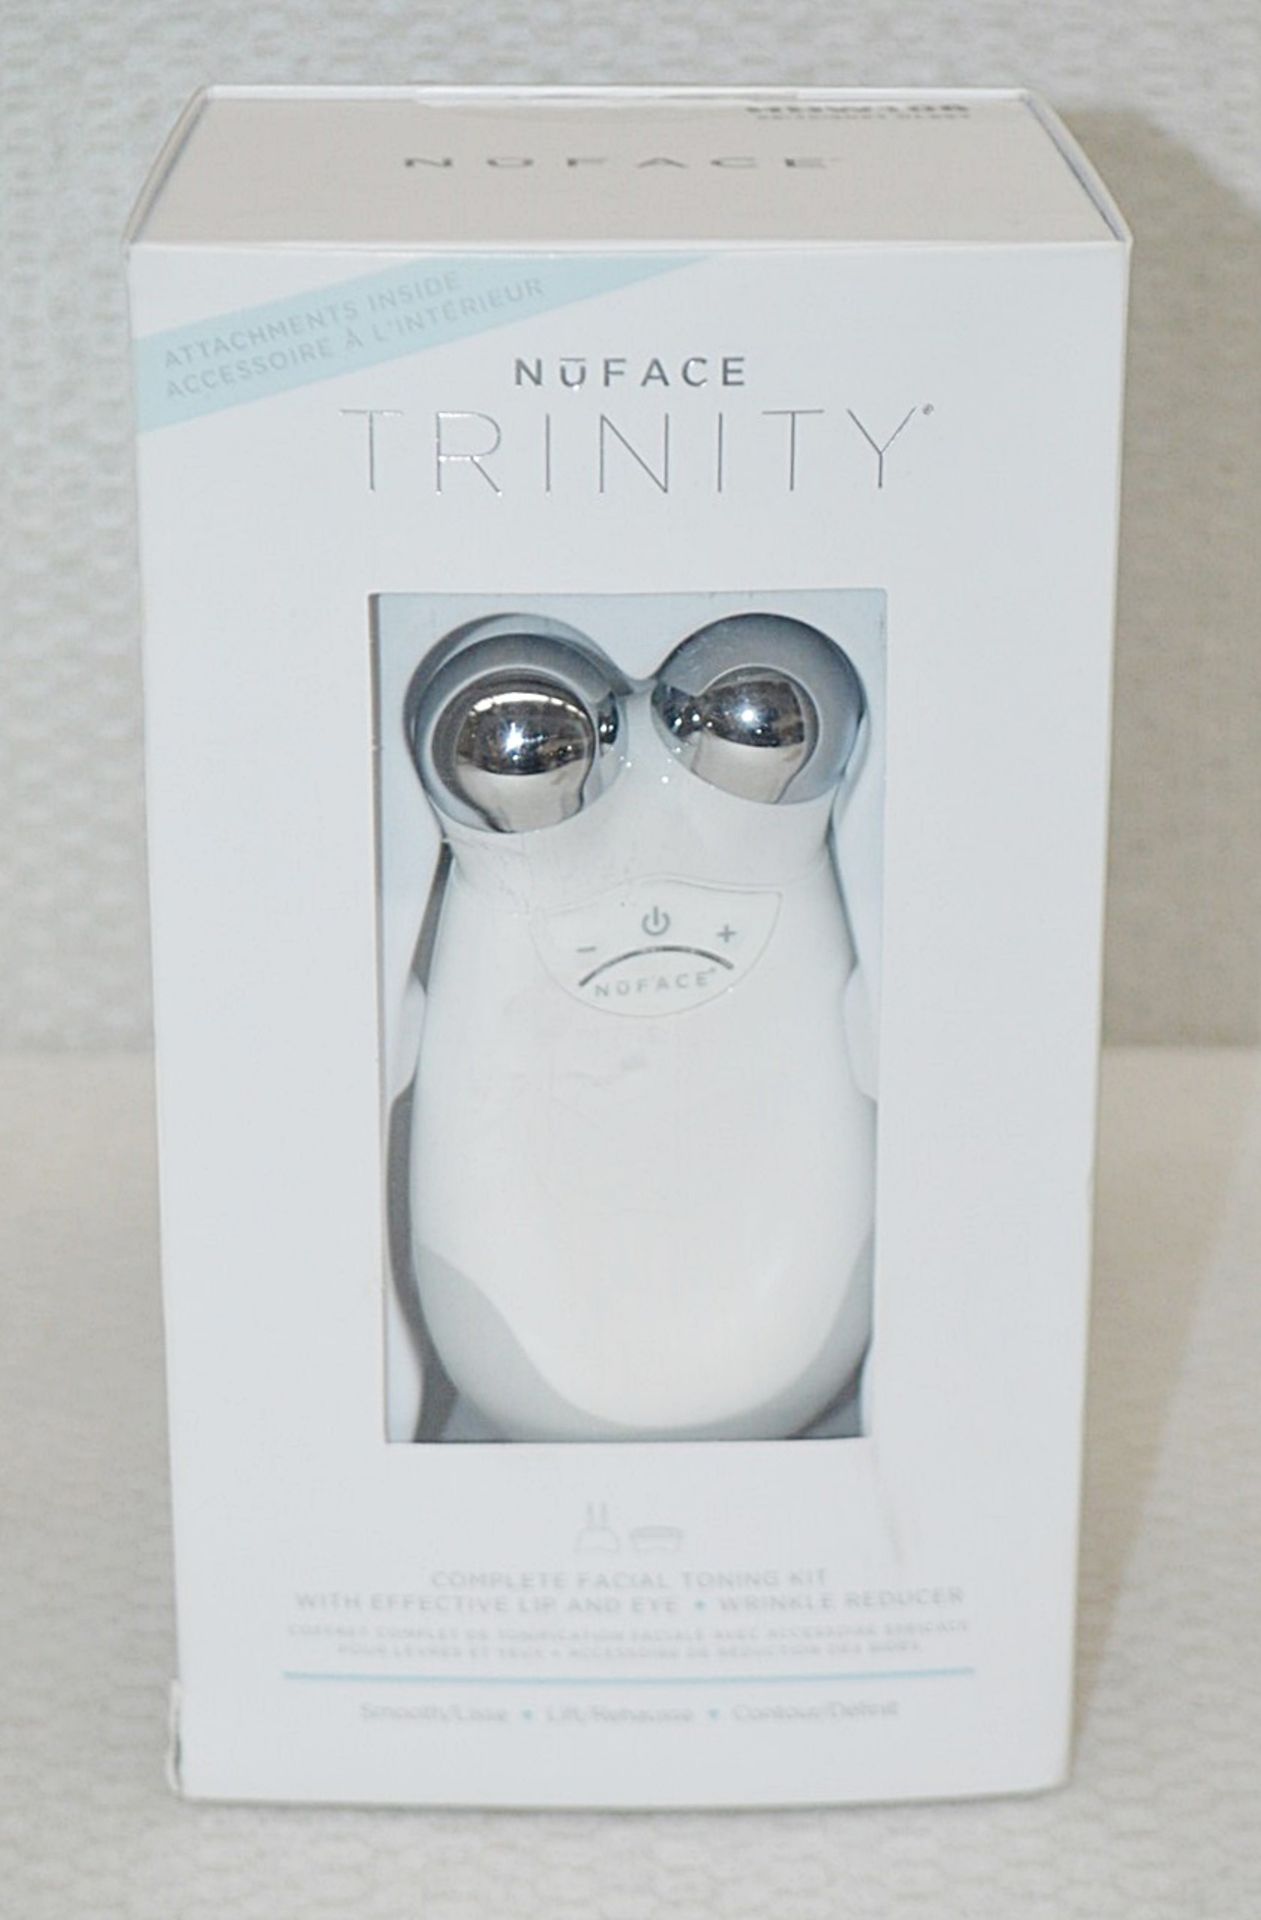 1 x NUFACE 'Trinity' Microcurrent Facial Toning Device, With ELE Attachment - Original RRP £457.00 - Image 2 of 6